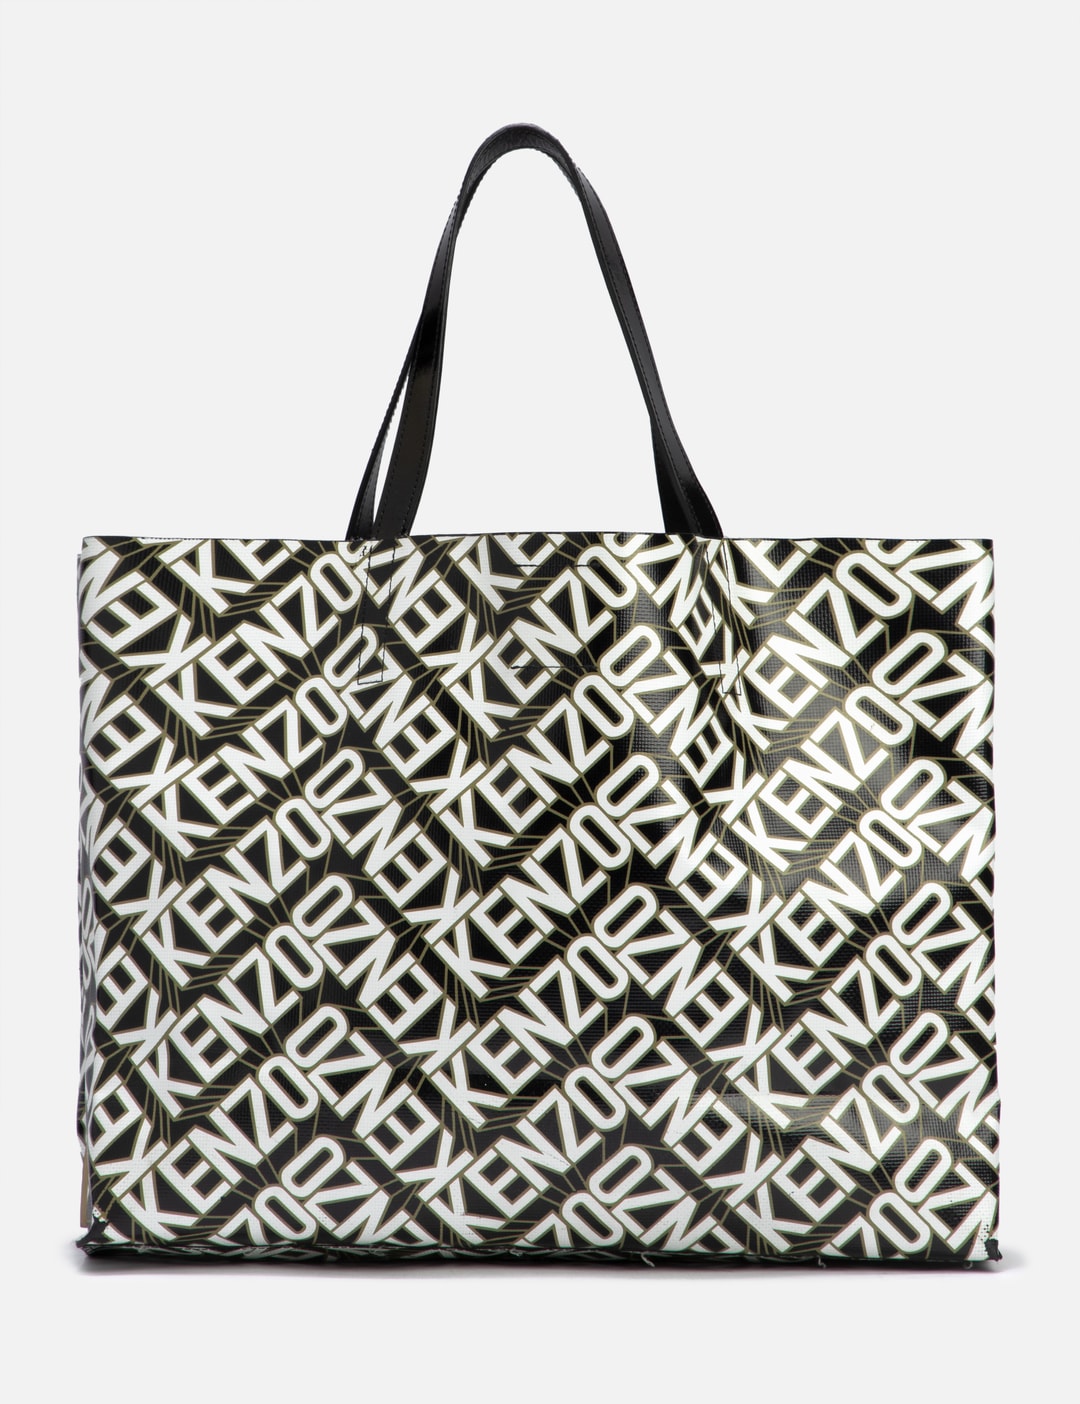 Louis Vuitton - LOUIS VUITTON X MURAKAMI TAKASHI TOTE BAG  HBX - Globally  Curated Fashion and Lifestyle by Hypebeast